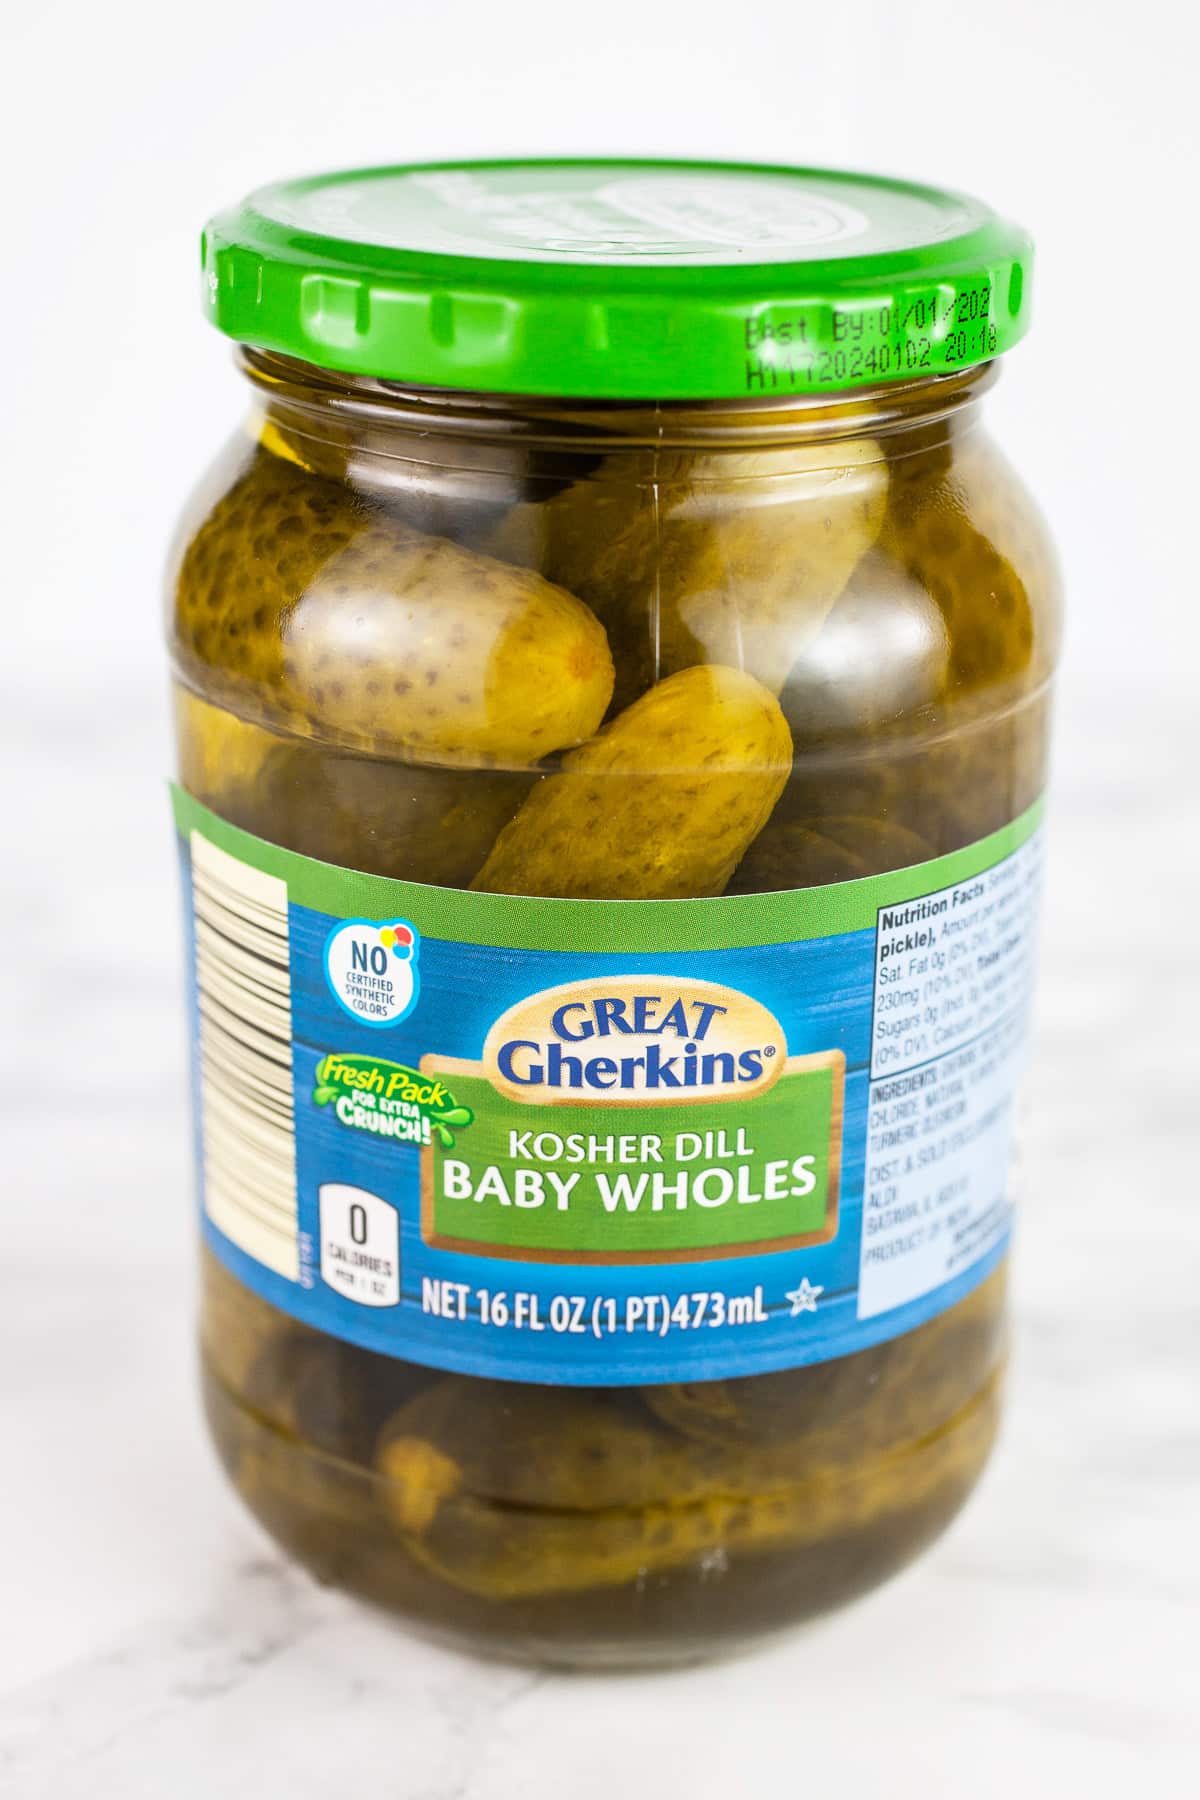 Unopened jar of baby dill kosher pickles on white surface.